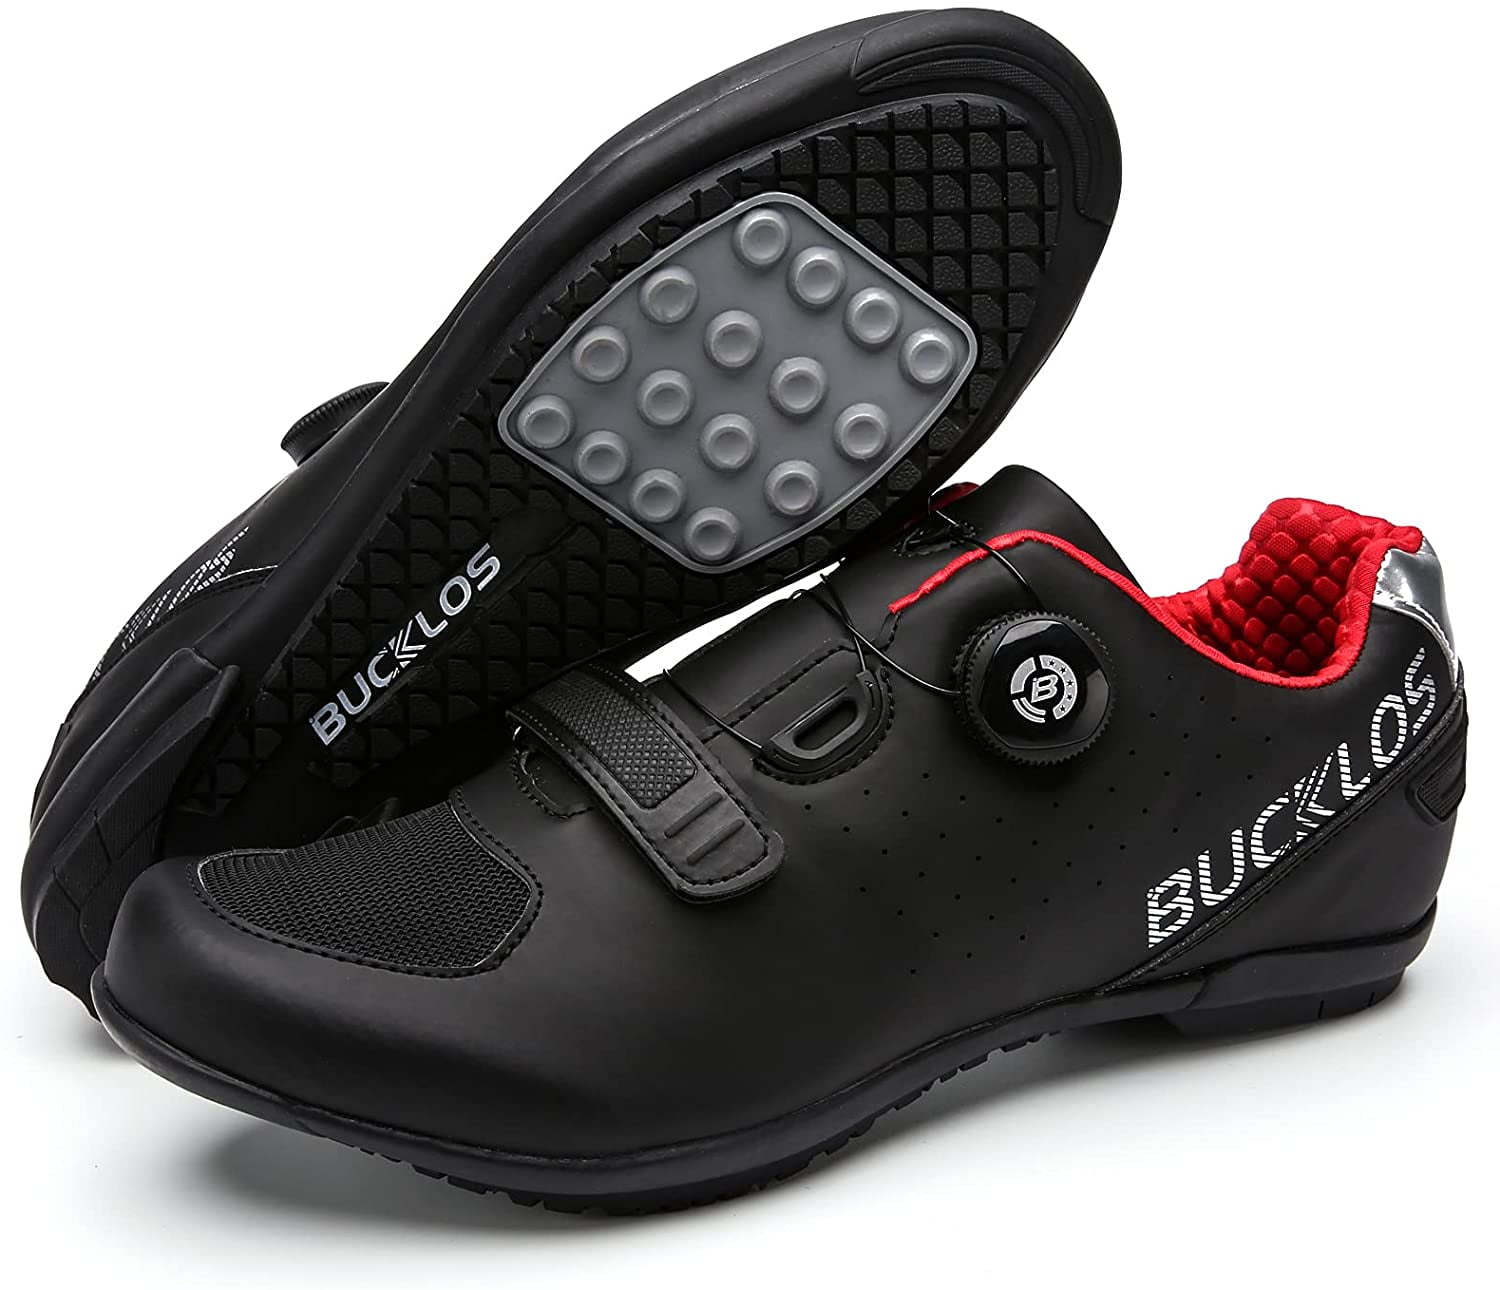 Details about   Professional Men Cycling Shoes Spin Peloton Riding Road SPD Bike Sports Sneakers 